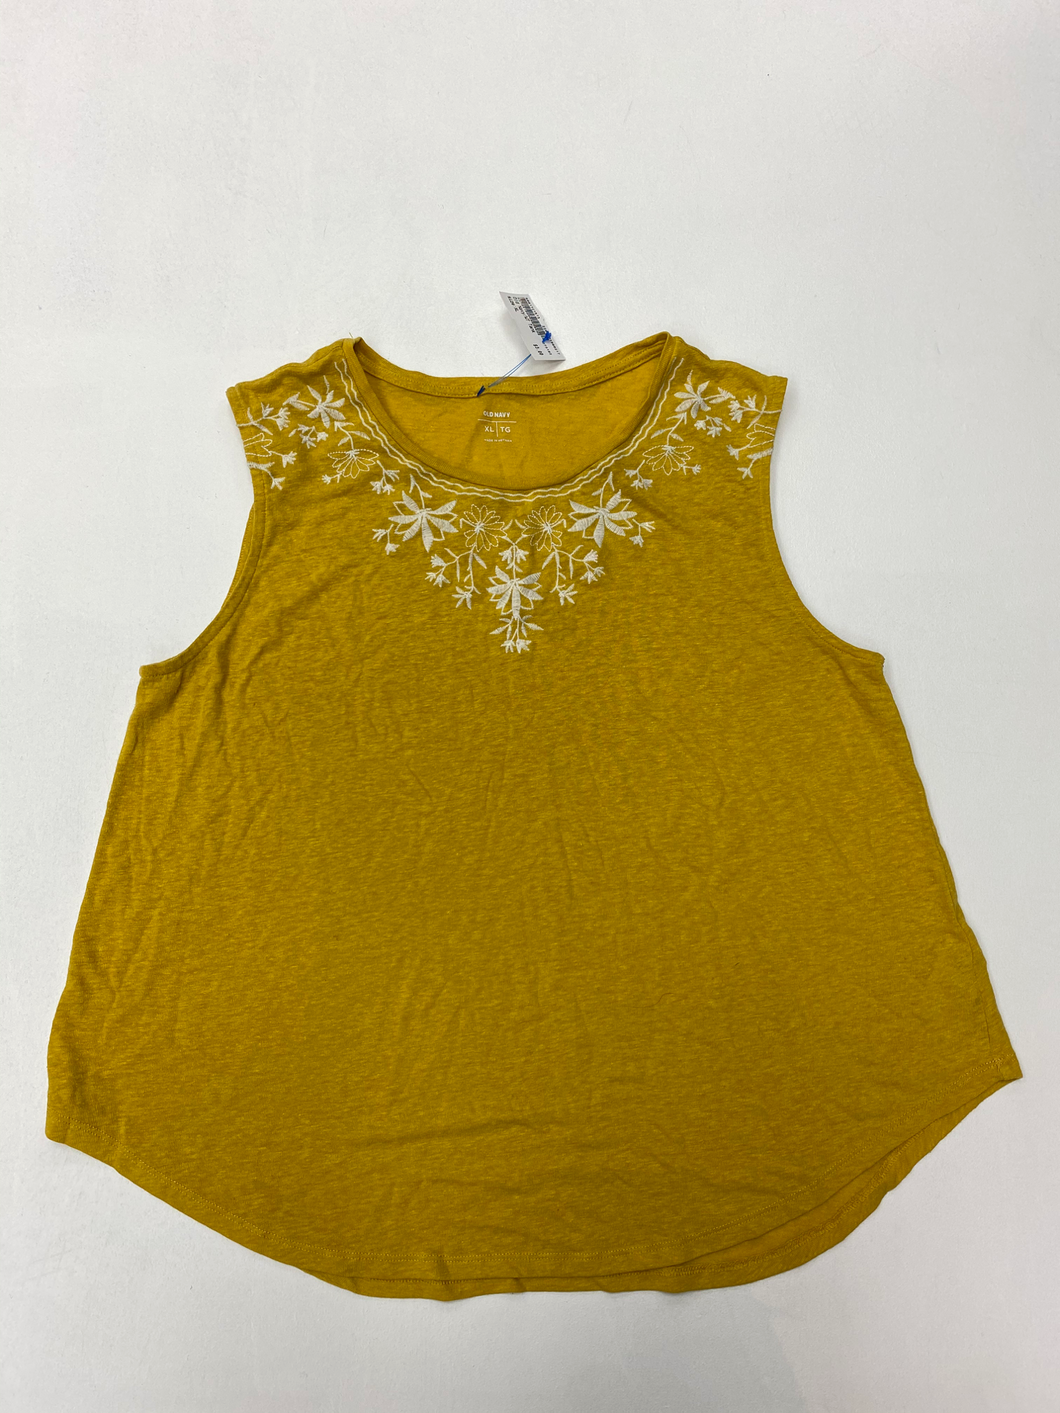 Old Navy Tank Top Size Extra Large